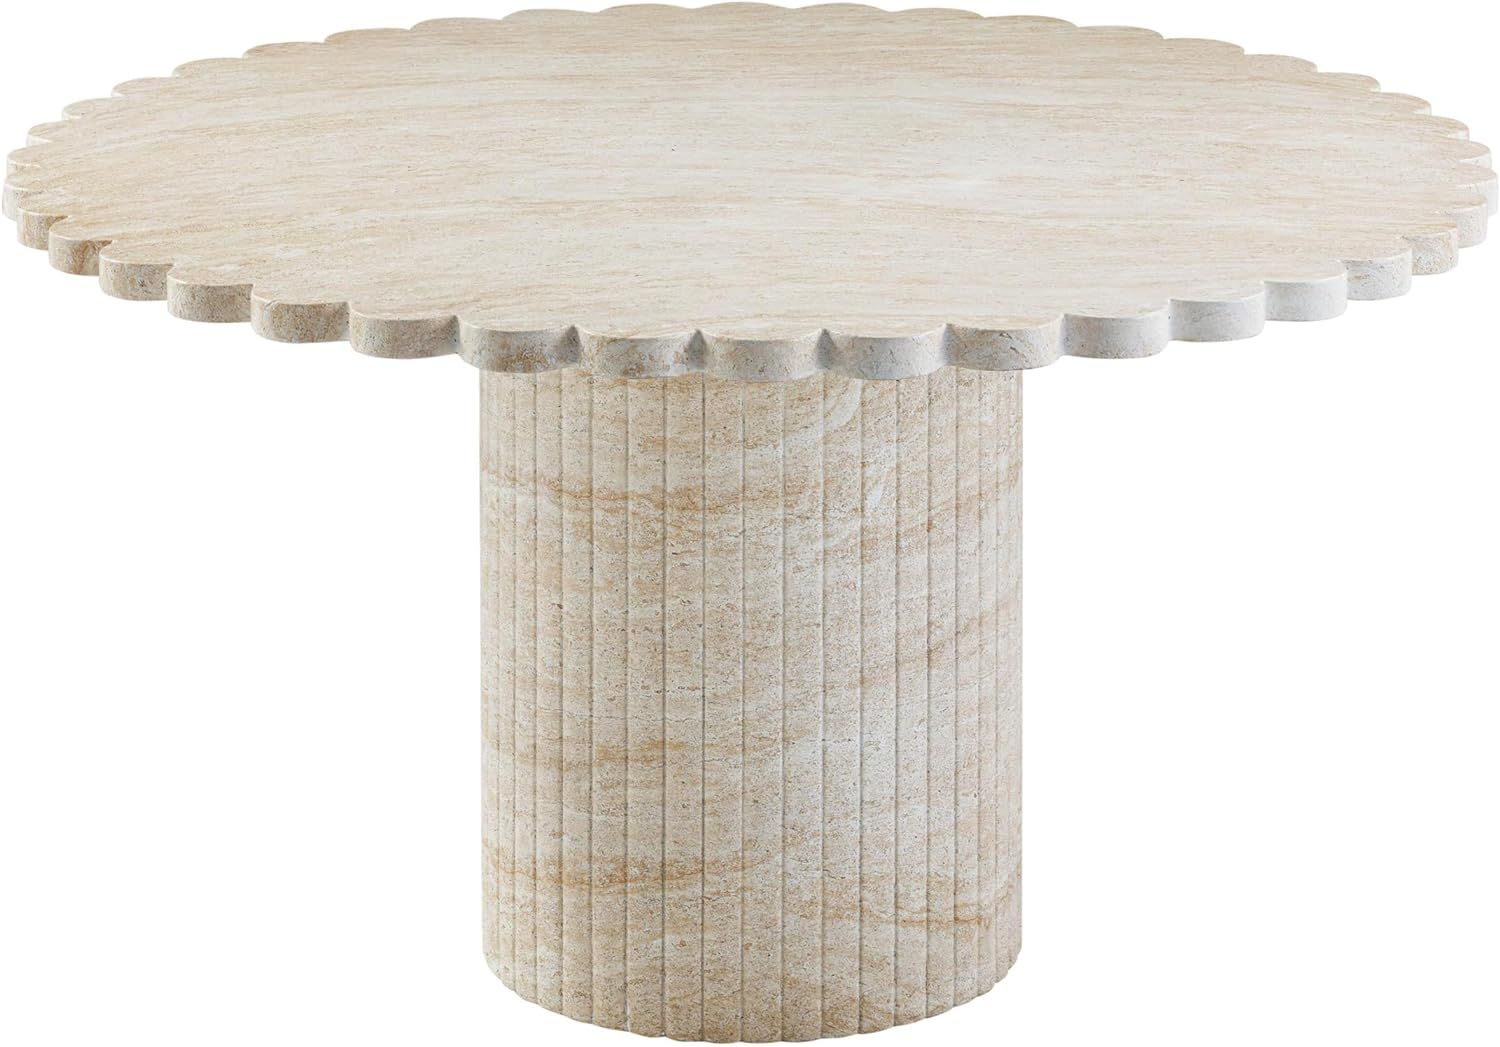 Tov Furniture Blossom Washed Travertine Finish Indoor/Outdoor 54" Round Dining Table | Amazon (US)